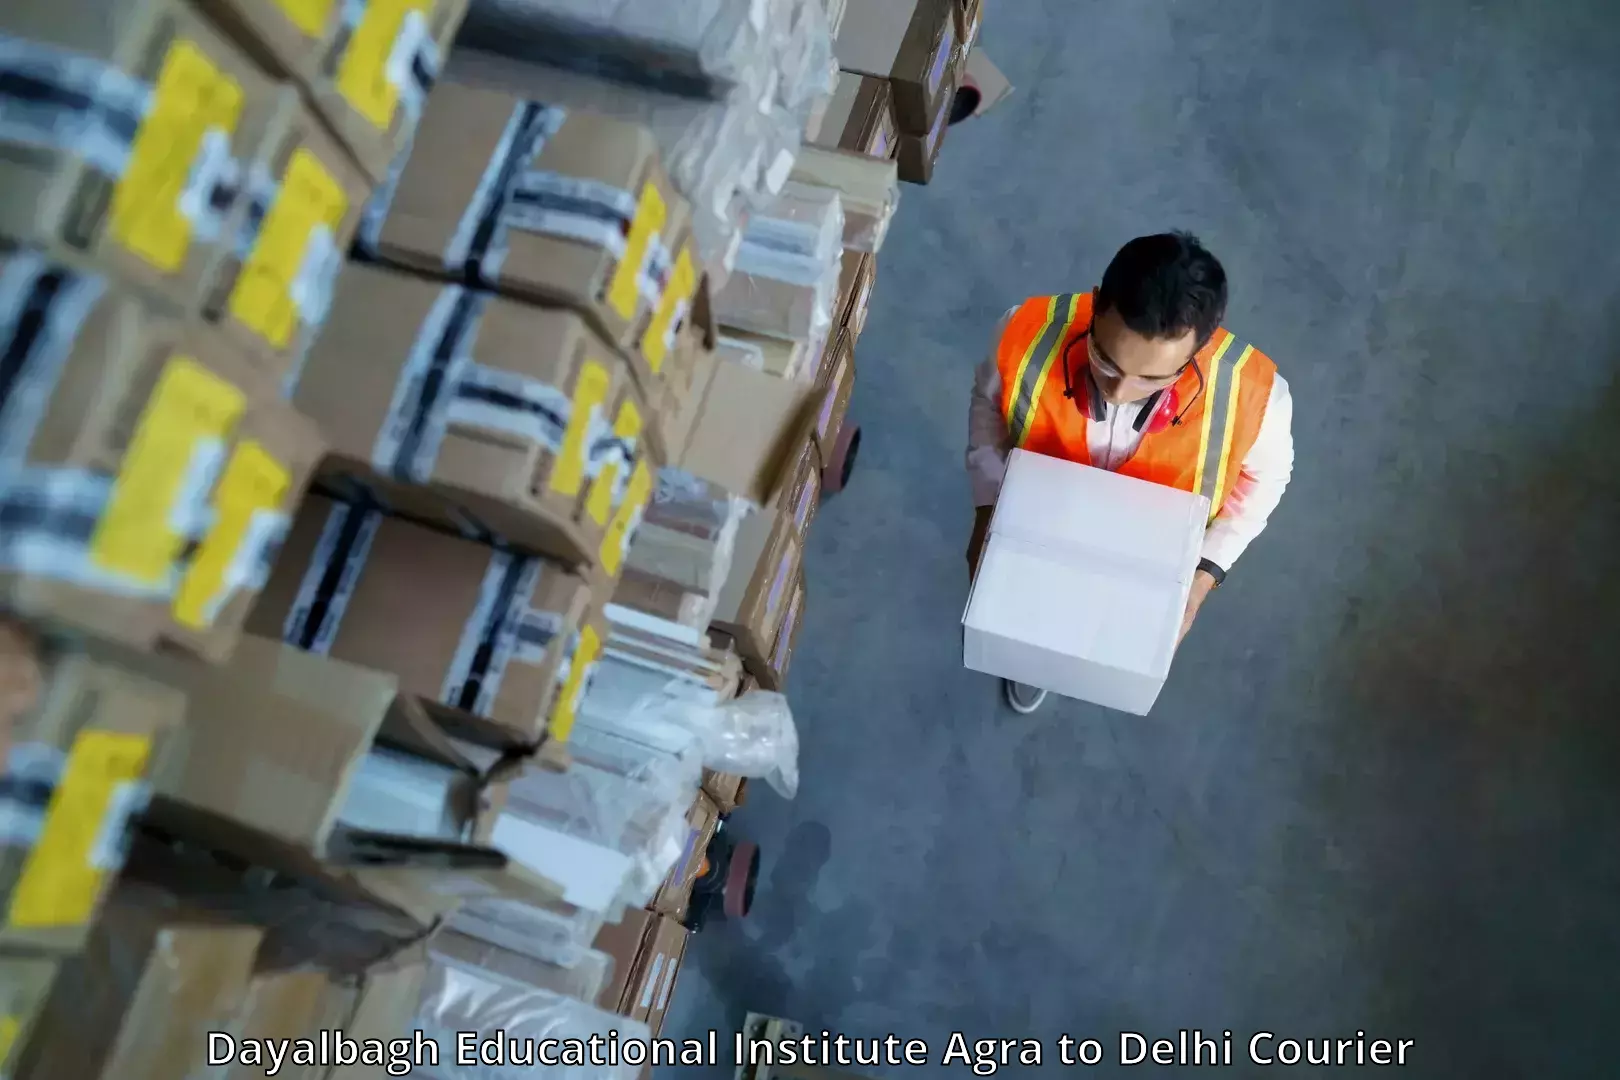 Tailored freight services Dayalbagh Educational Institute Agra to Delhi